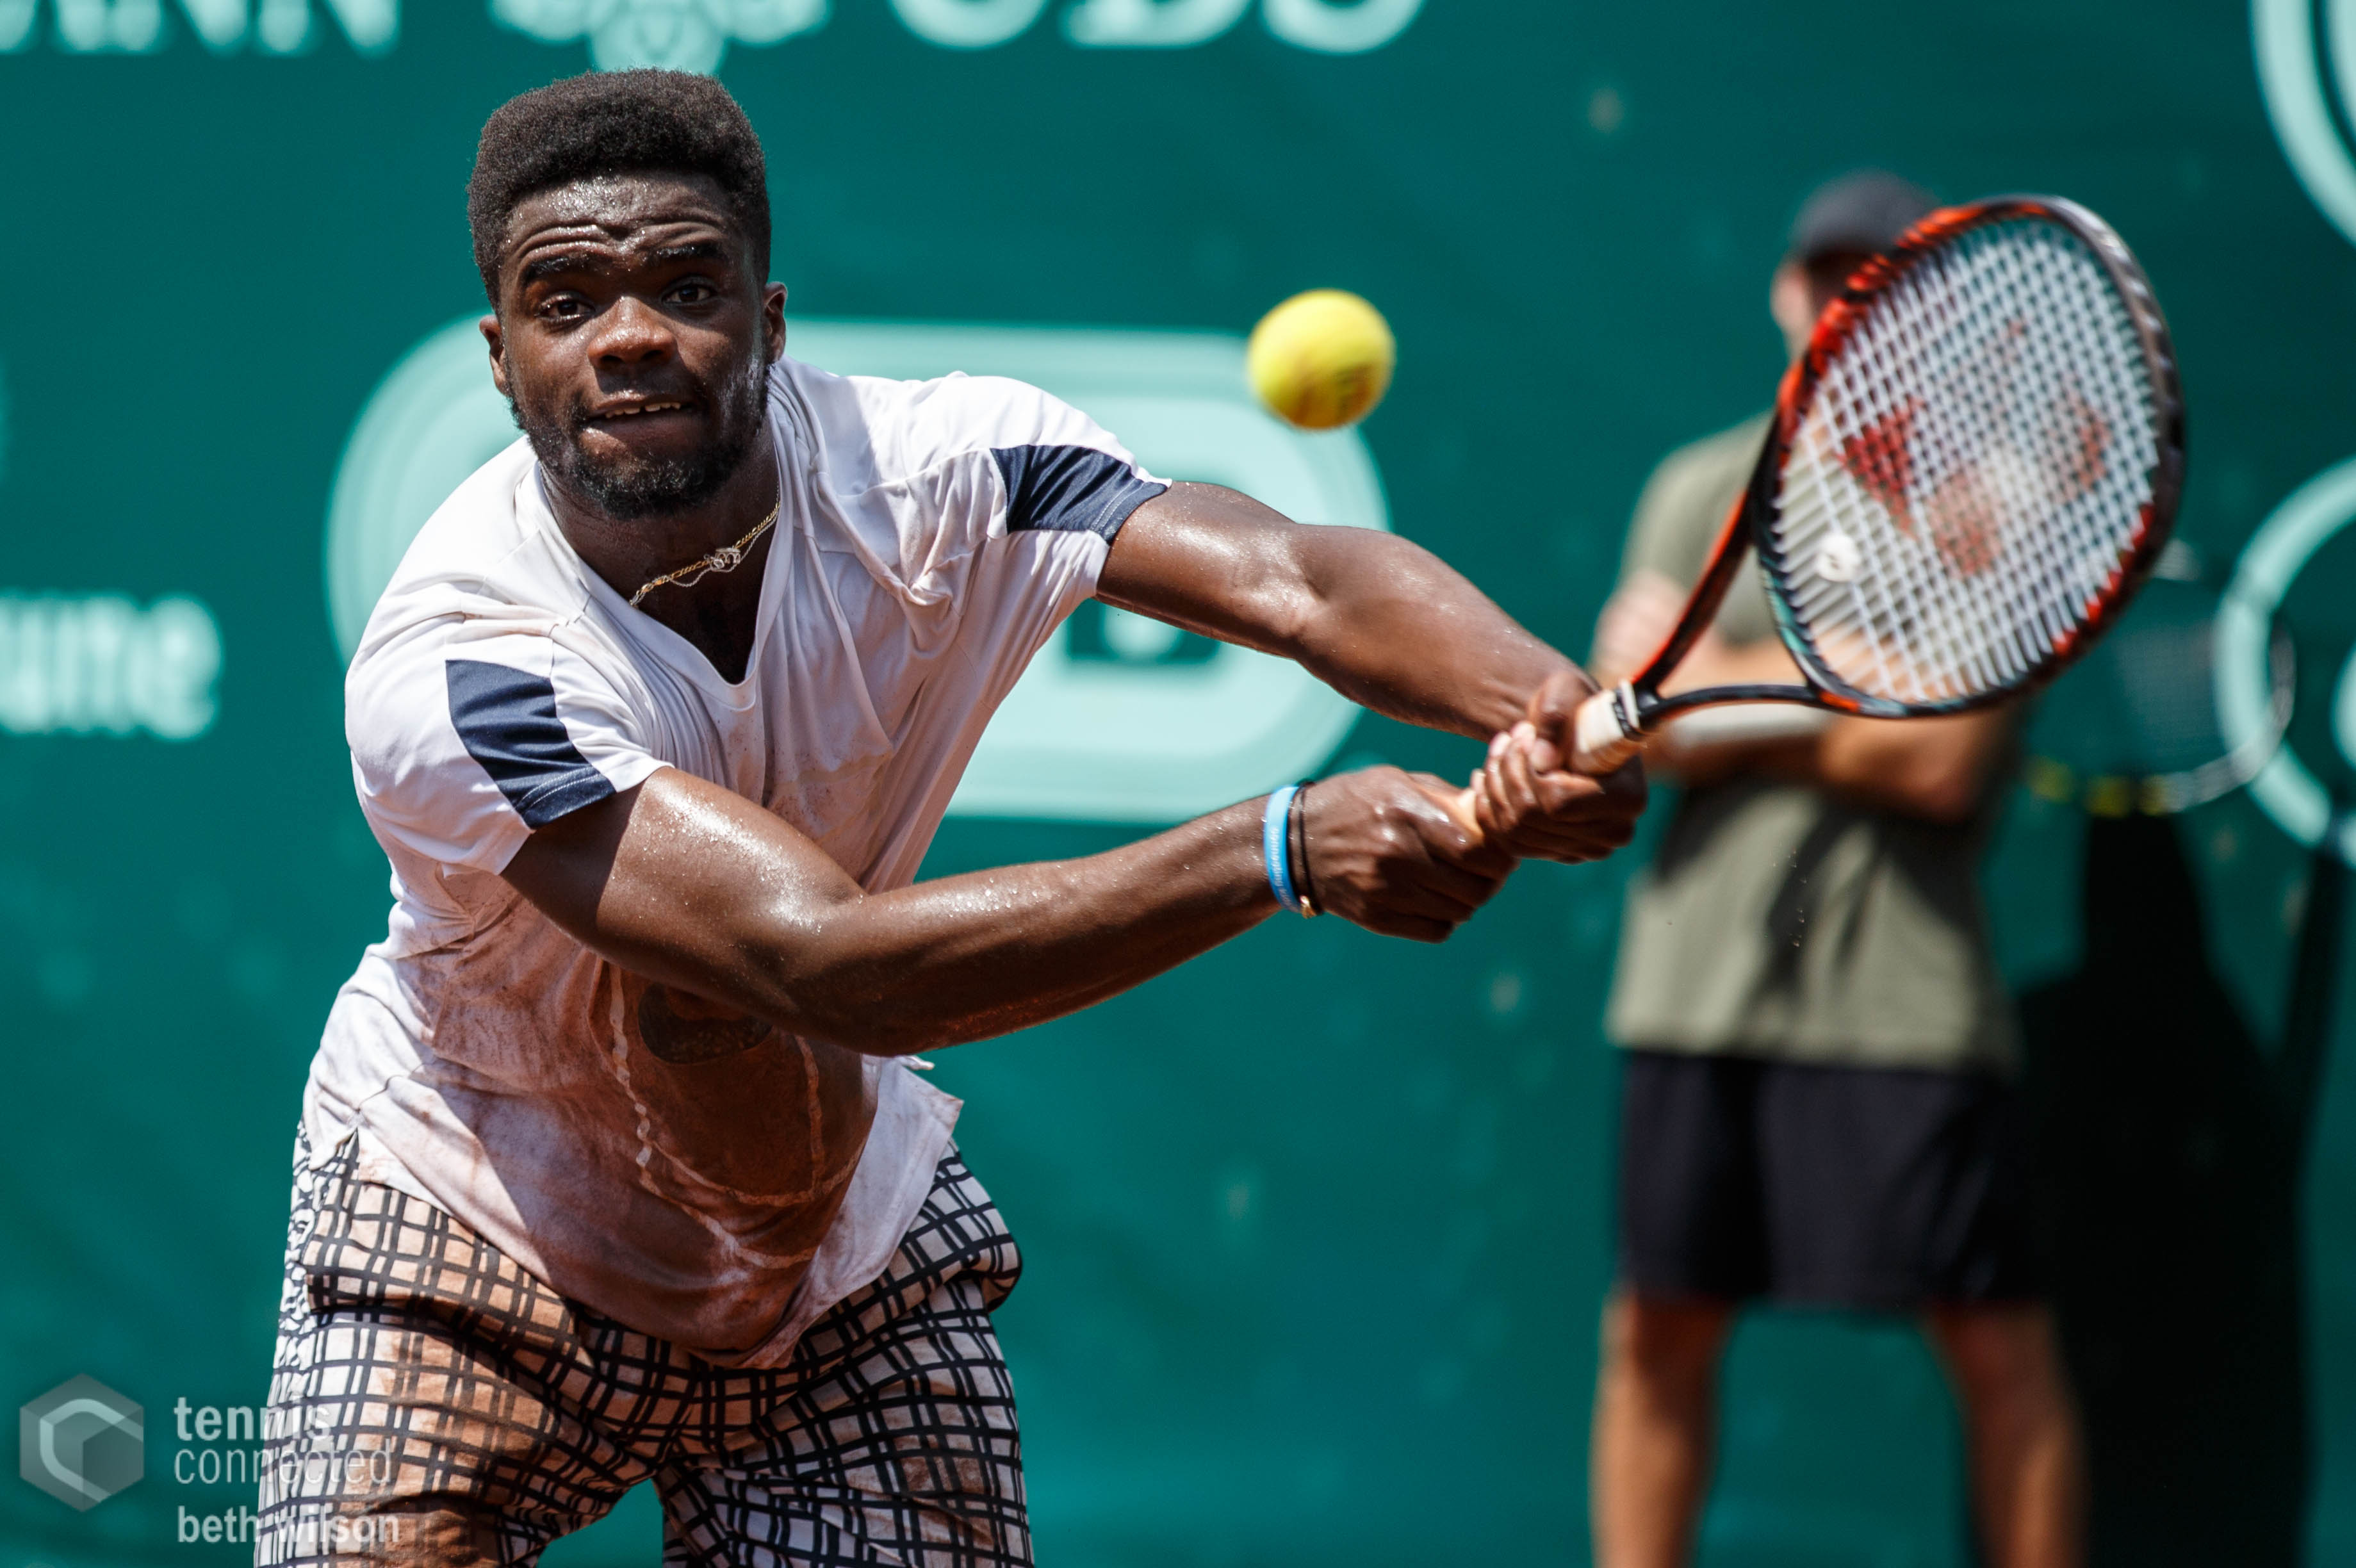 5 Things to Know About Local Tennis Star Frances Tiafoe